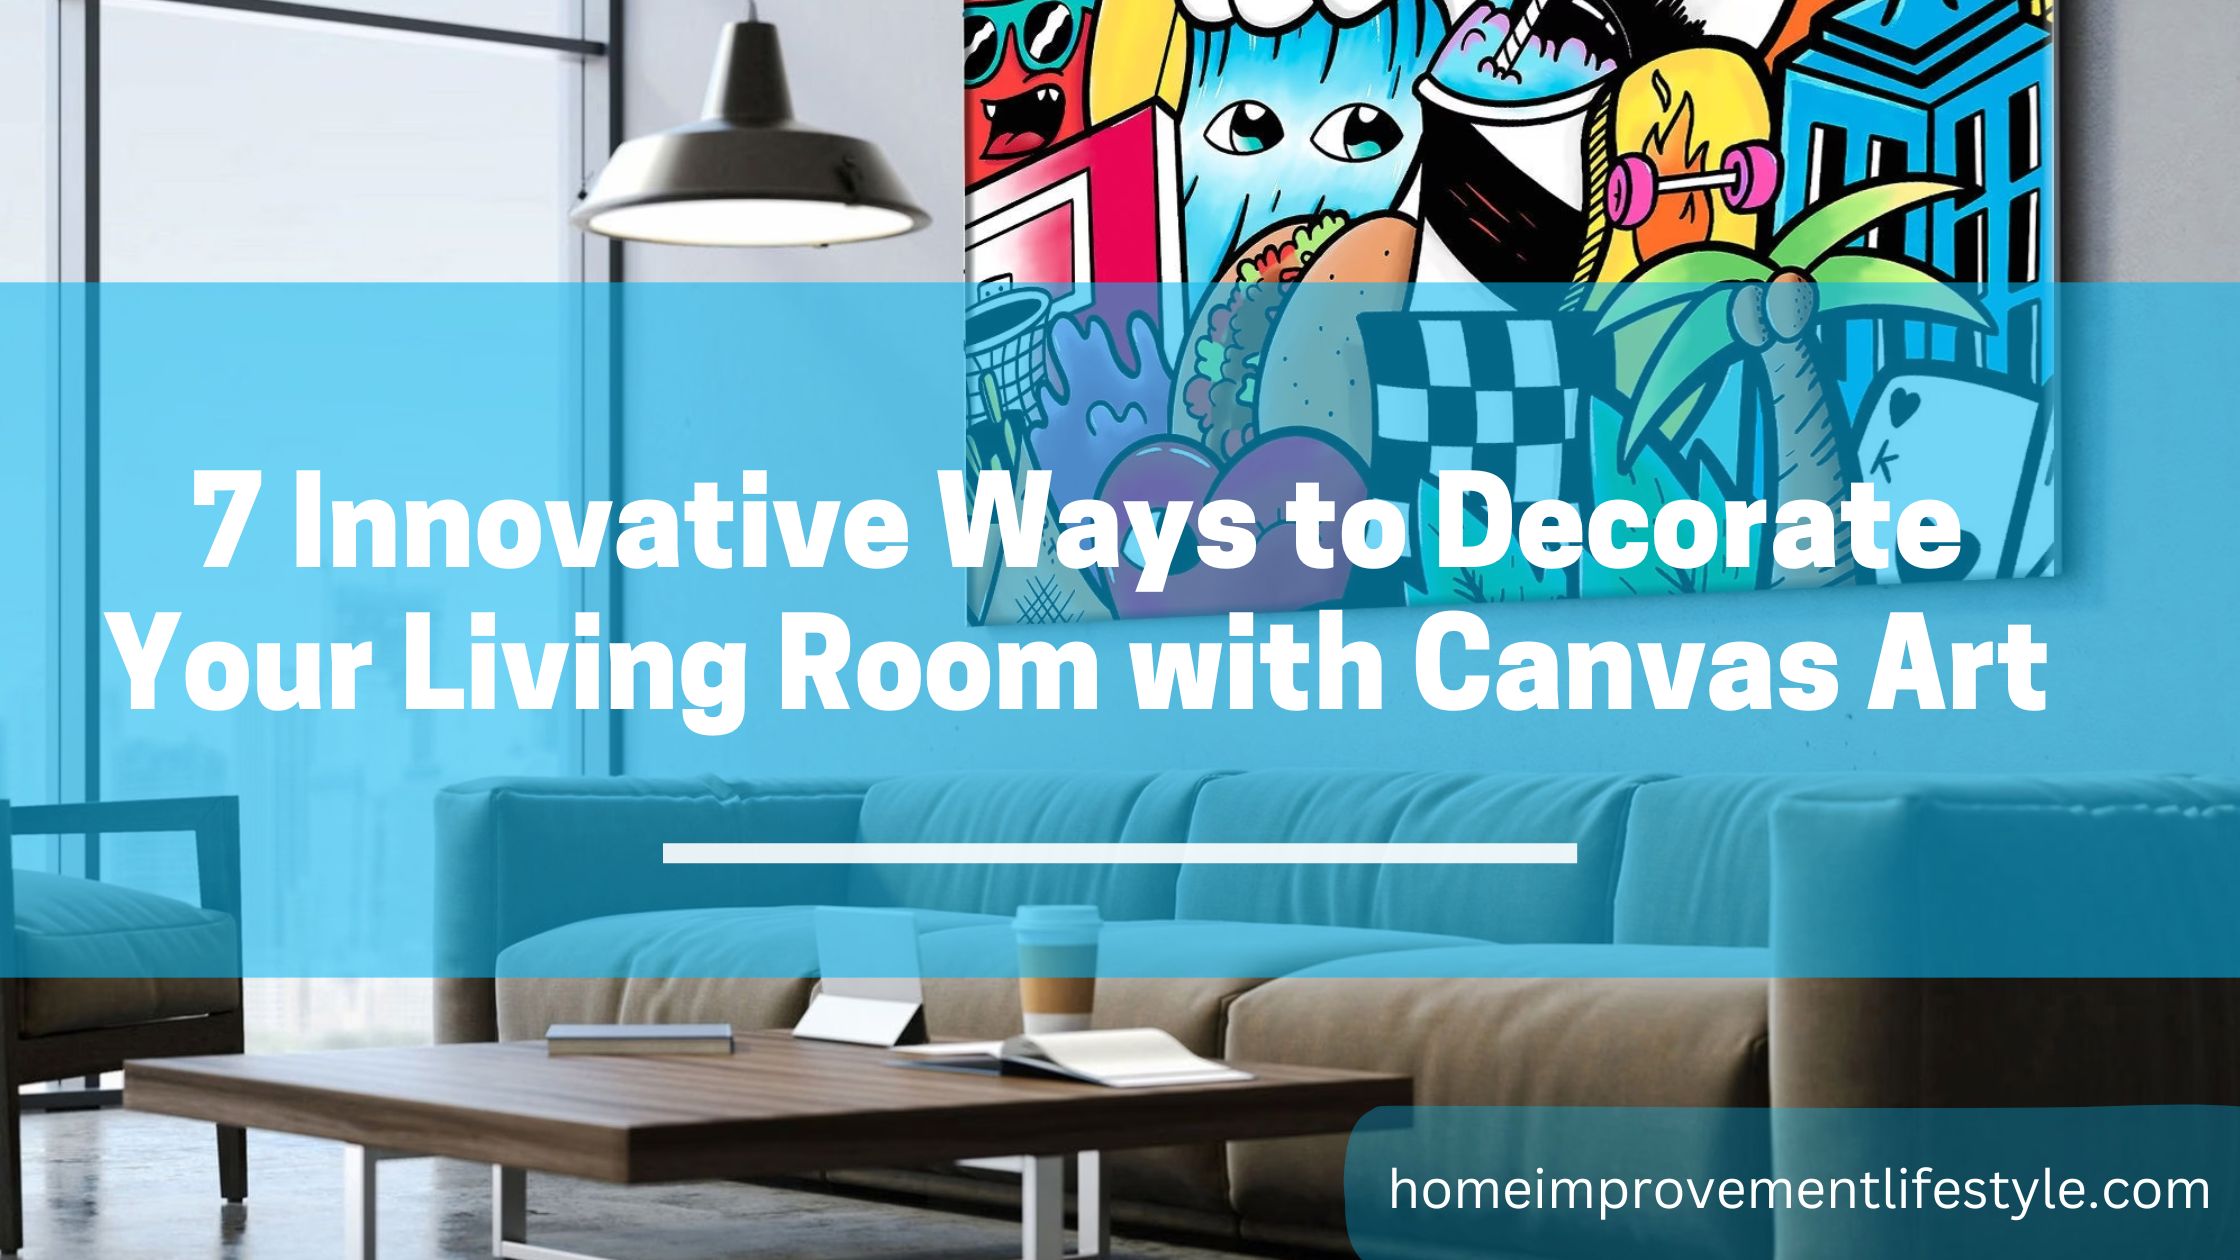 7 Innovative Ways to Decorate Your Living Room with Canvas Art